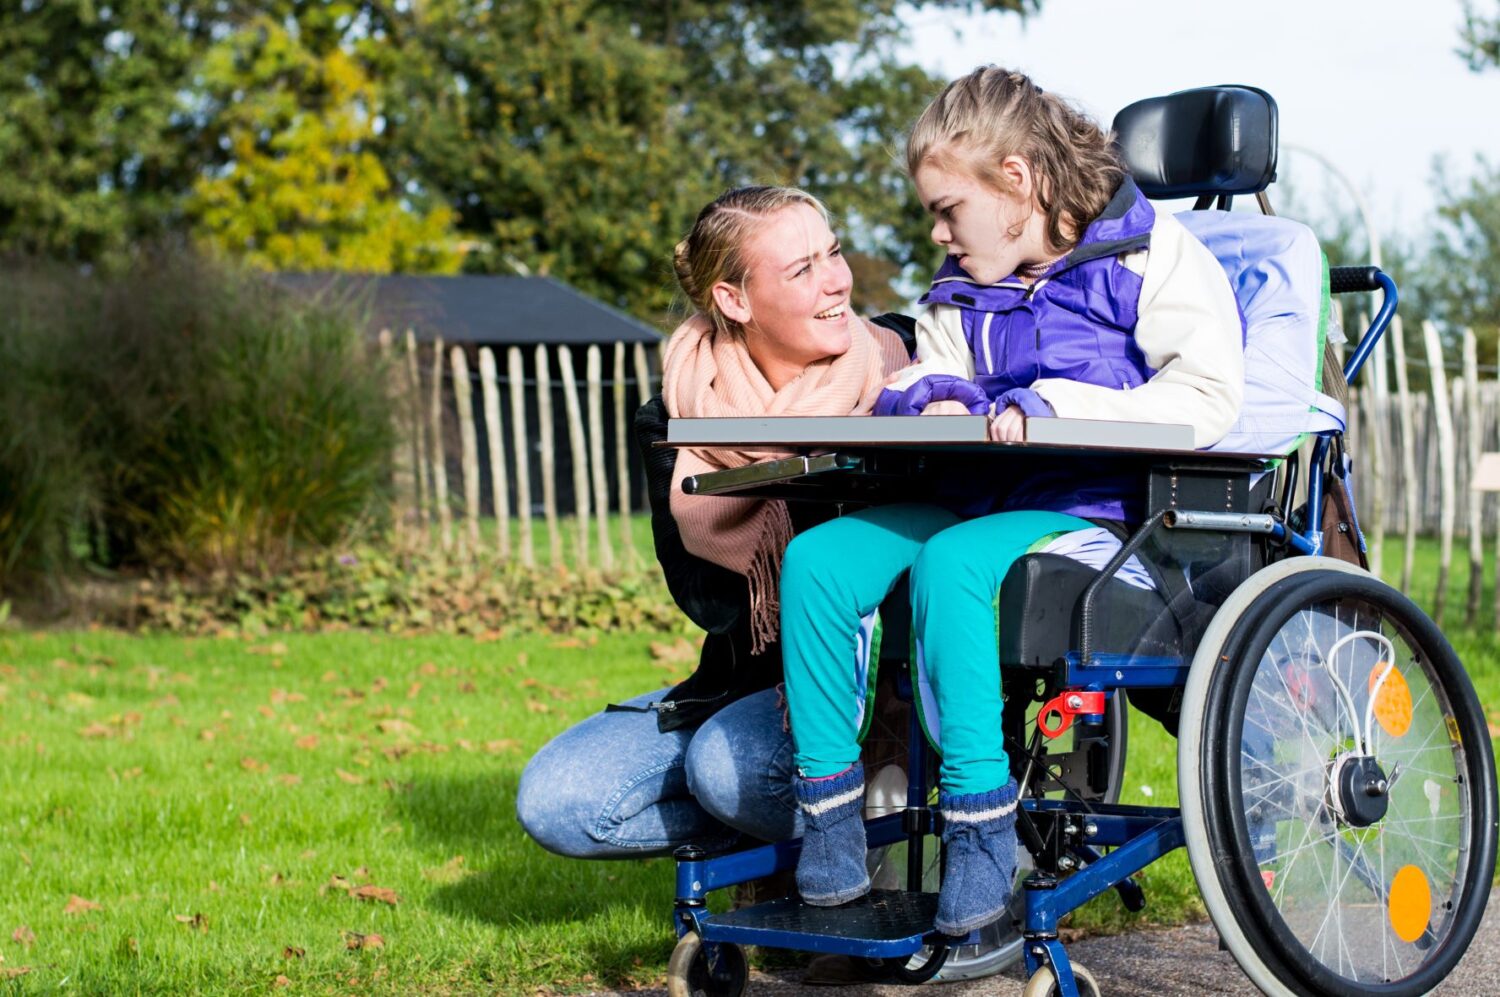 female child in wheelchair and adult female outside